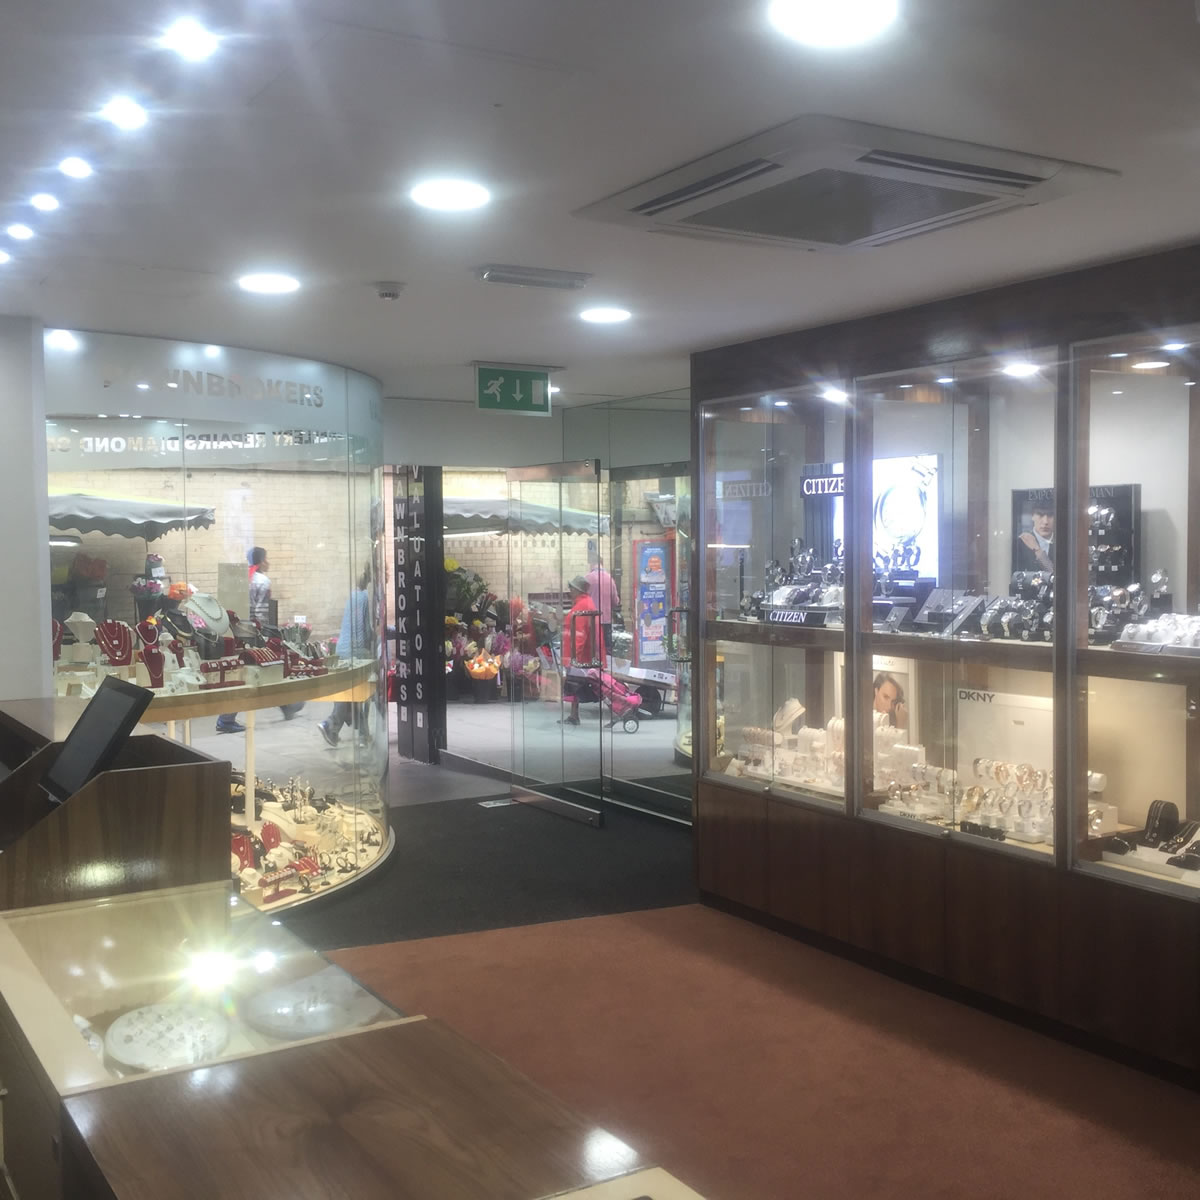 Mallards jewellers and pawnbrokers. Quality bespoke shopfitting  in a traditional style.